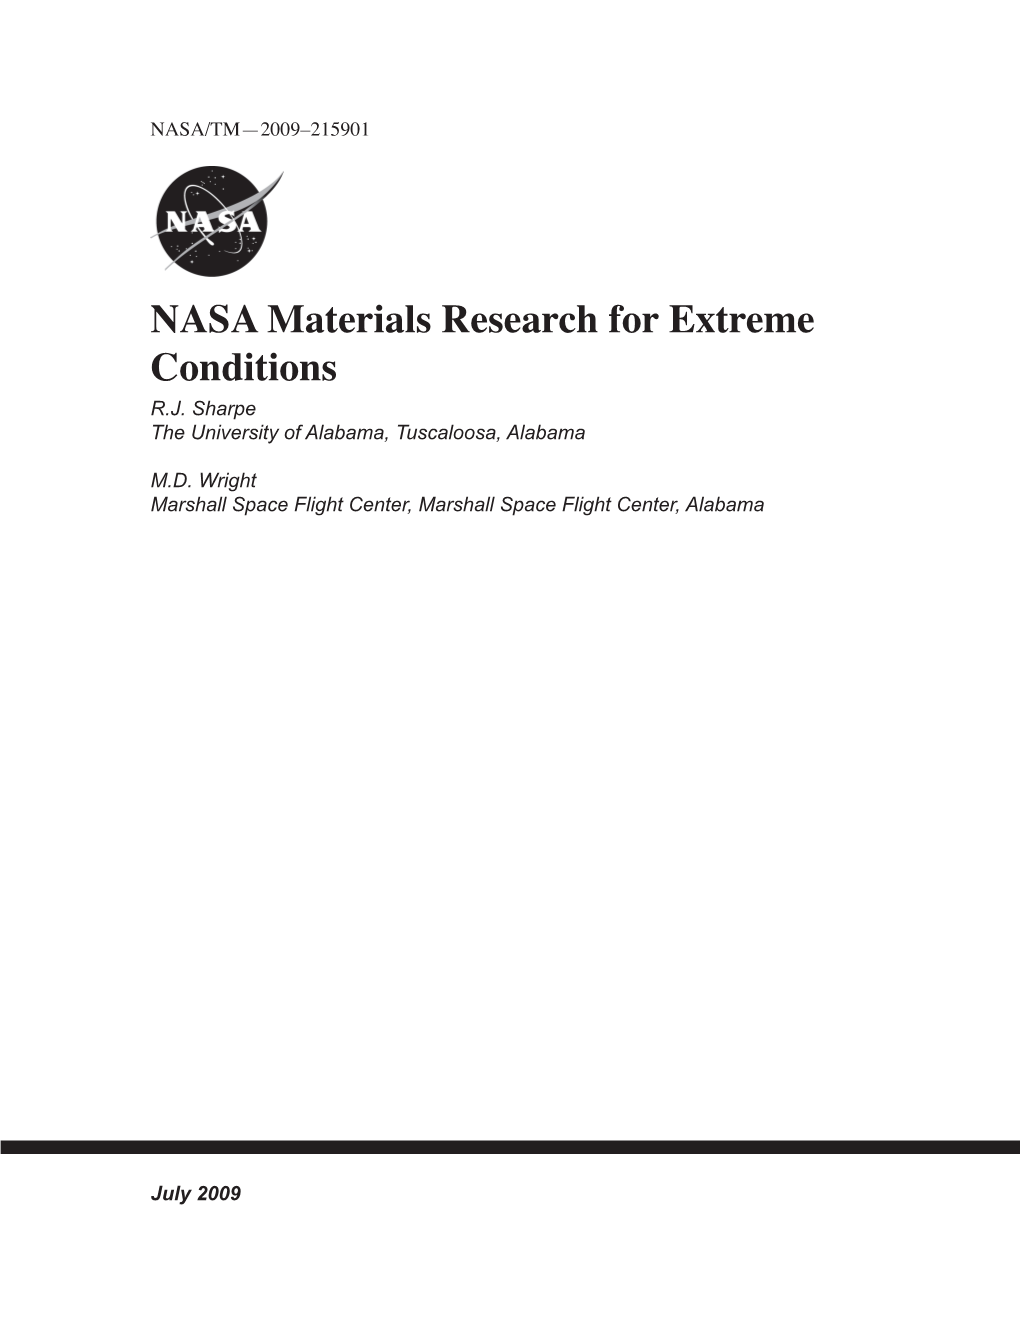 NASA Materials Research for Extreme Conditions R.J